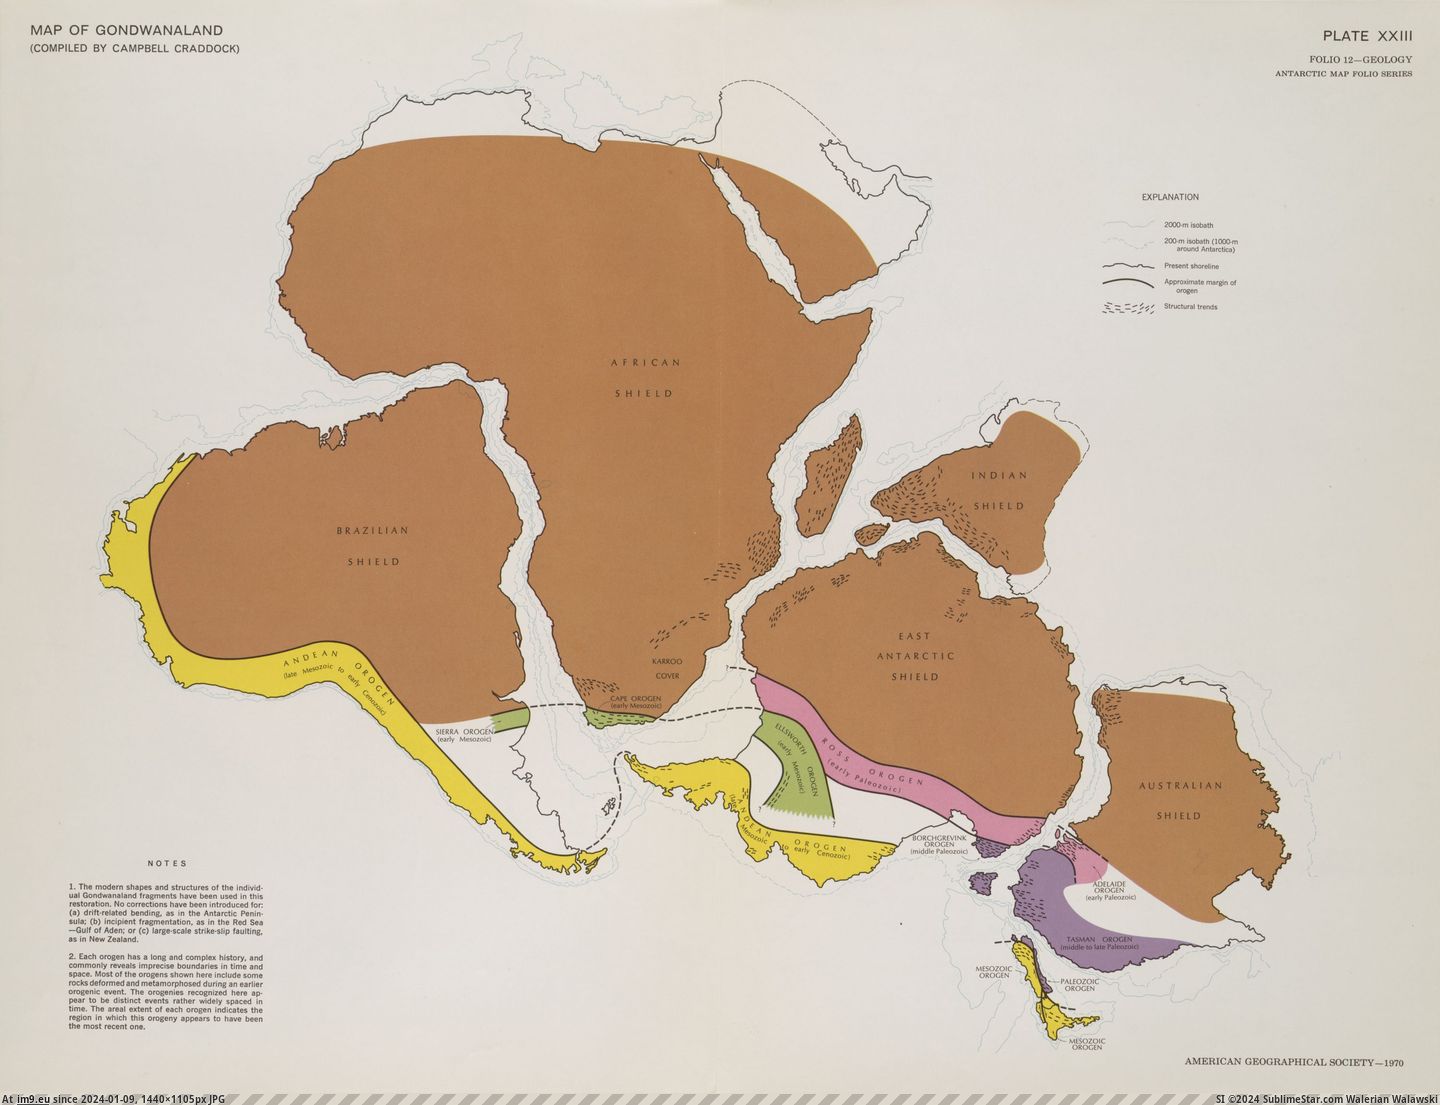 #Map #American #Campbell #Society #Compiled [Mapporn] Map of Gondwanaland (compiled by Campbell Craddock). American Geographical Society, 1970. [3000x2278] Pic. (Изображение из альбом My r/MAPS favs))